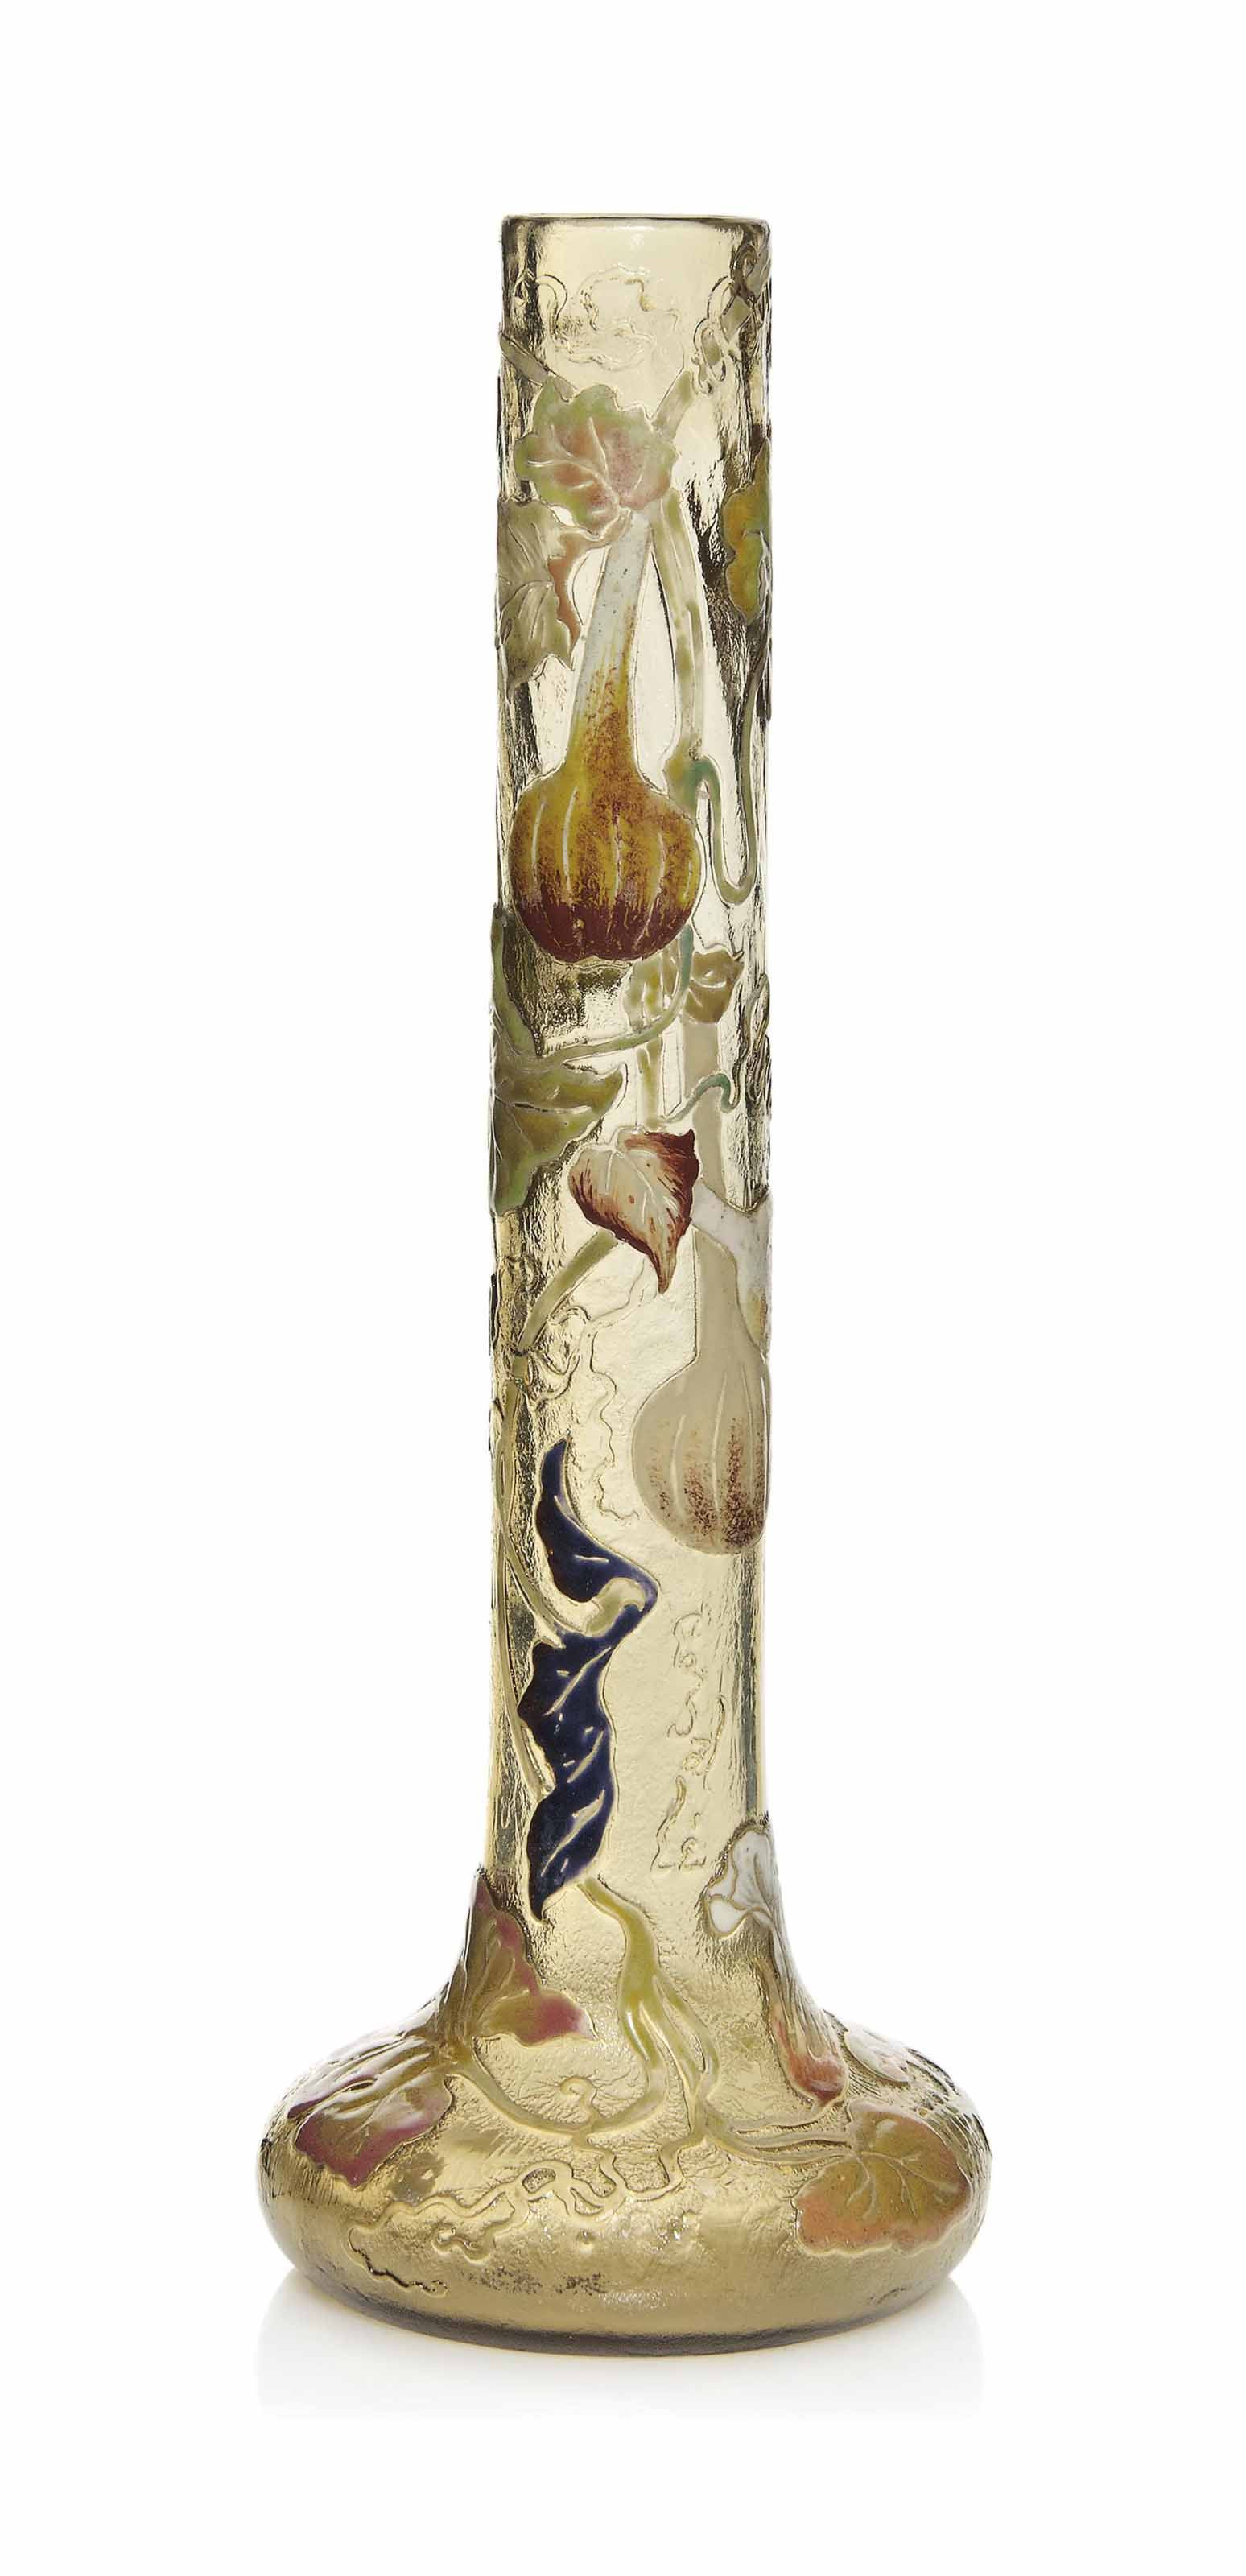 ceramic cowboy boot vase of a galle enamelled glass vase circa 1900 1900s flowers plants with regard to a galle enamelled glass vase circa 1900 1900s flowers plants christies